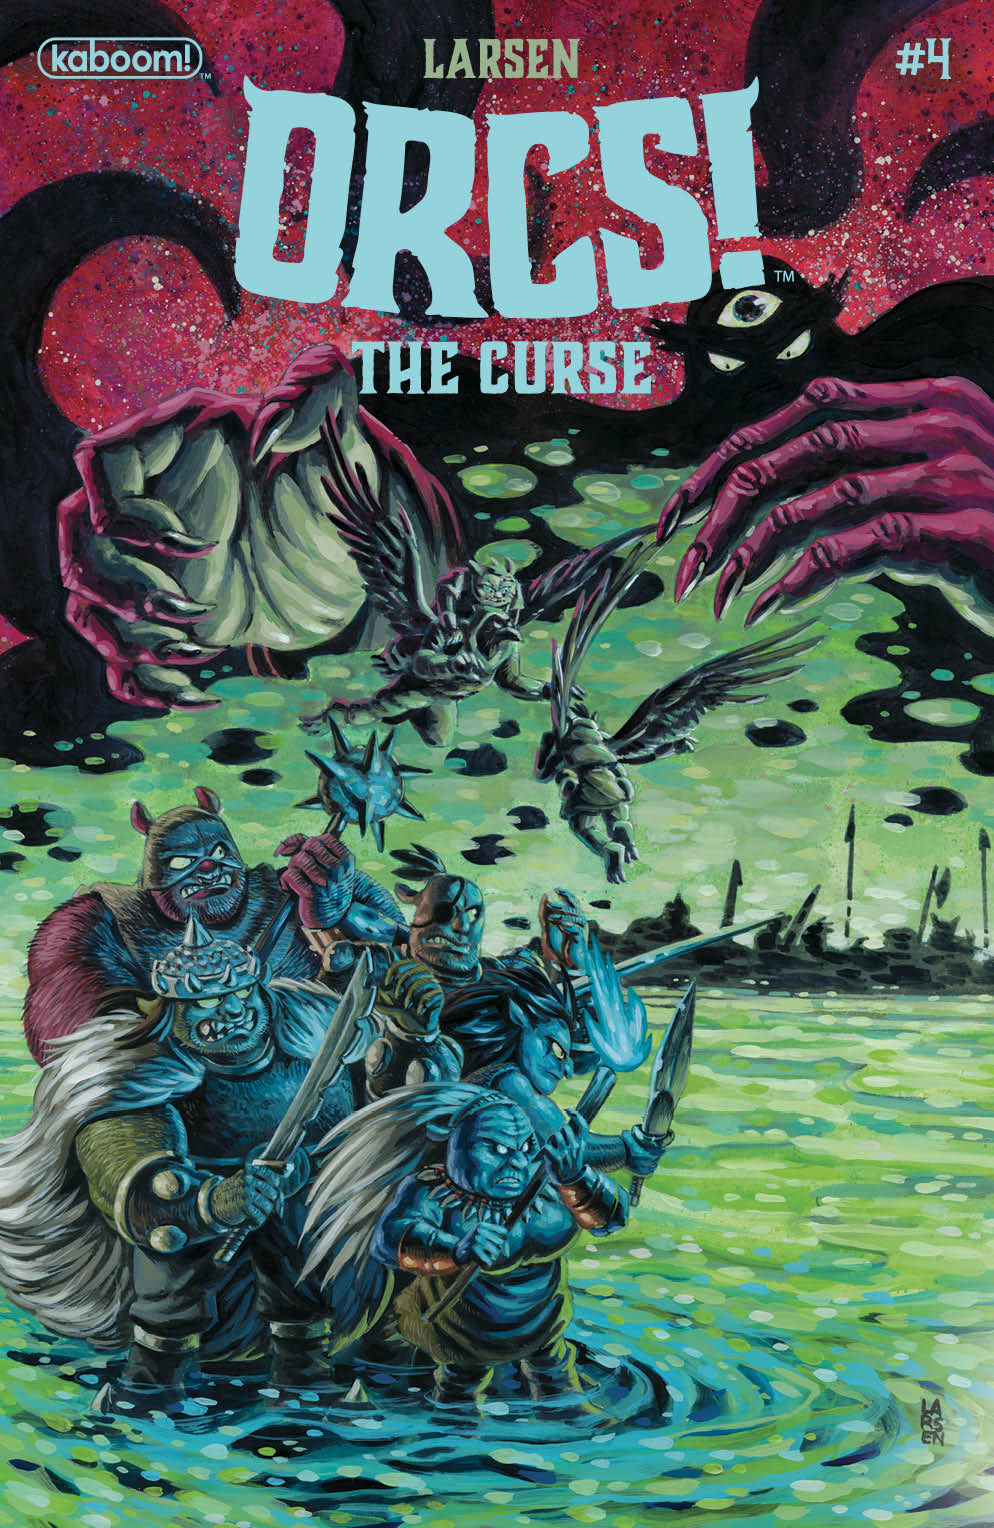 Orcs The Curse #4 Cover A Larsen (Of 4)